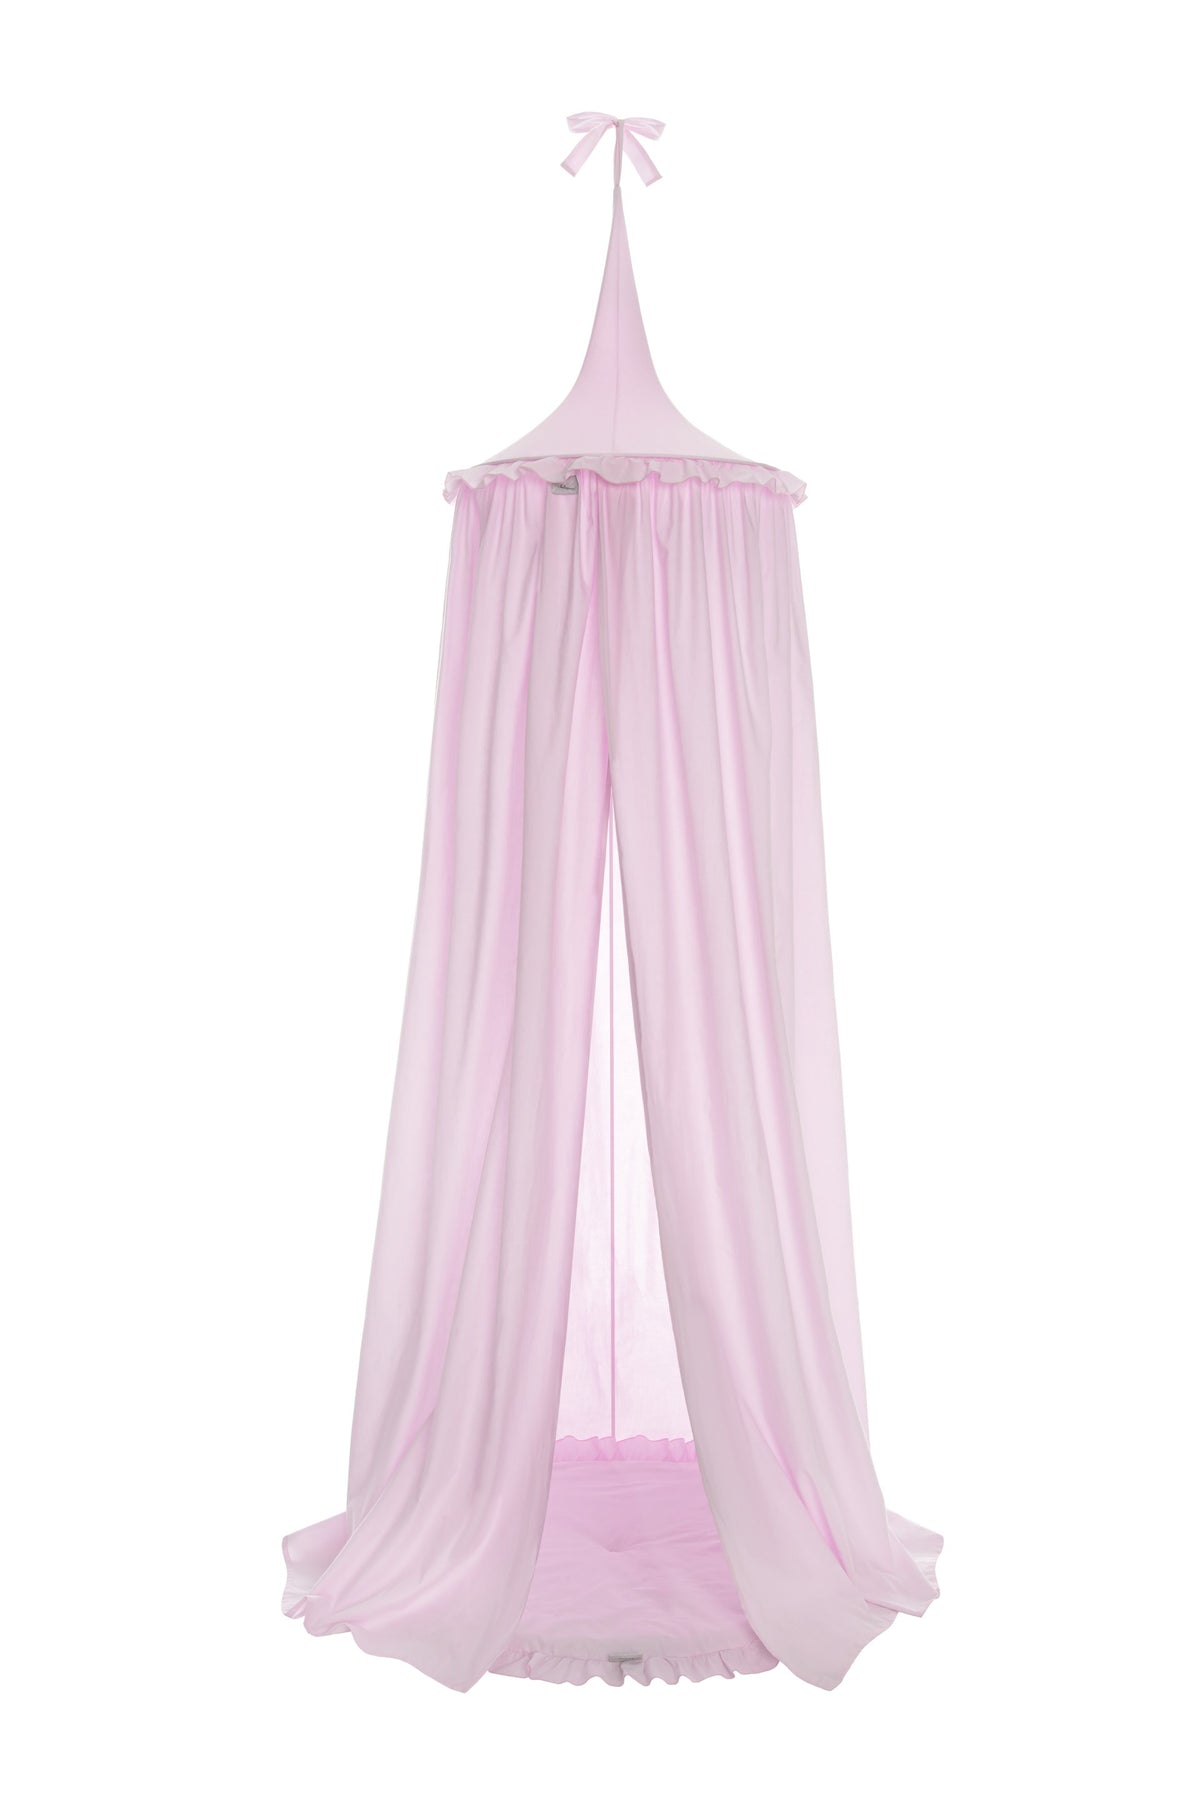 Belisima Mosquito Net with Riffle Pink with Floor Mat